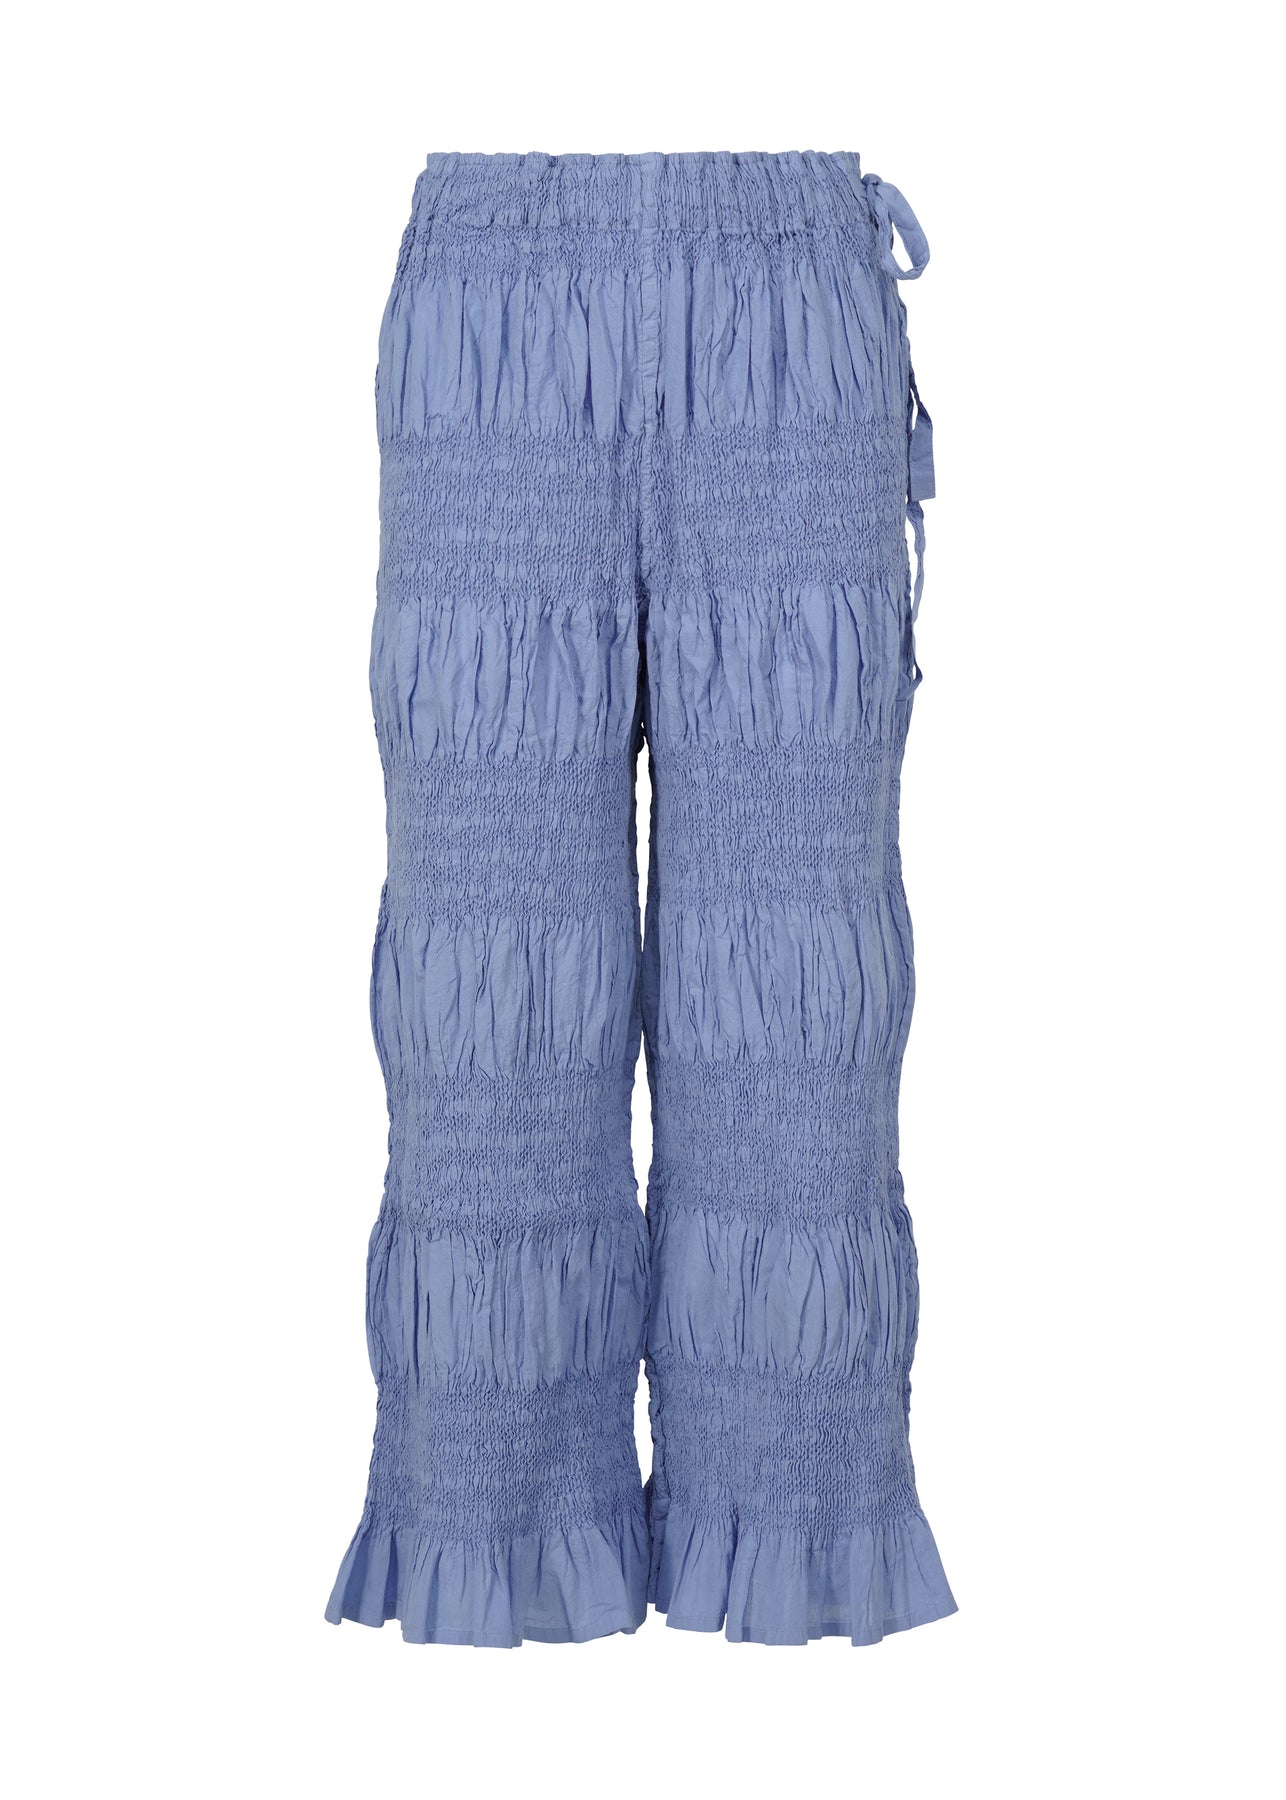 SHRINK STRIPE PANTS | The official ISSEY MIYAKE ONLINE STORE